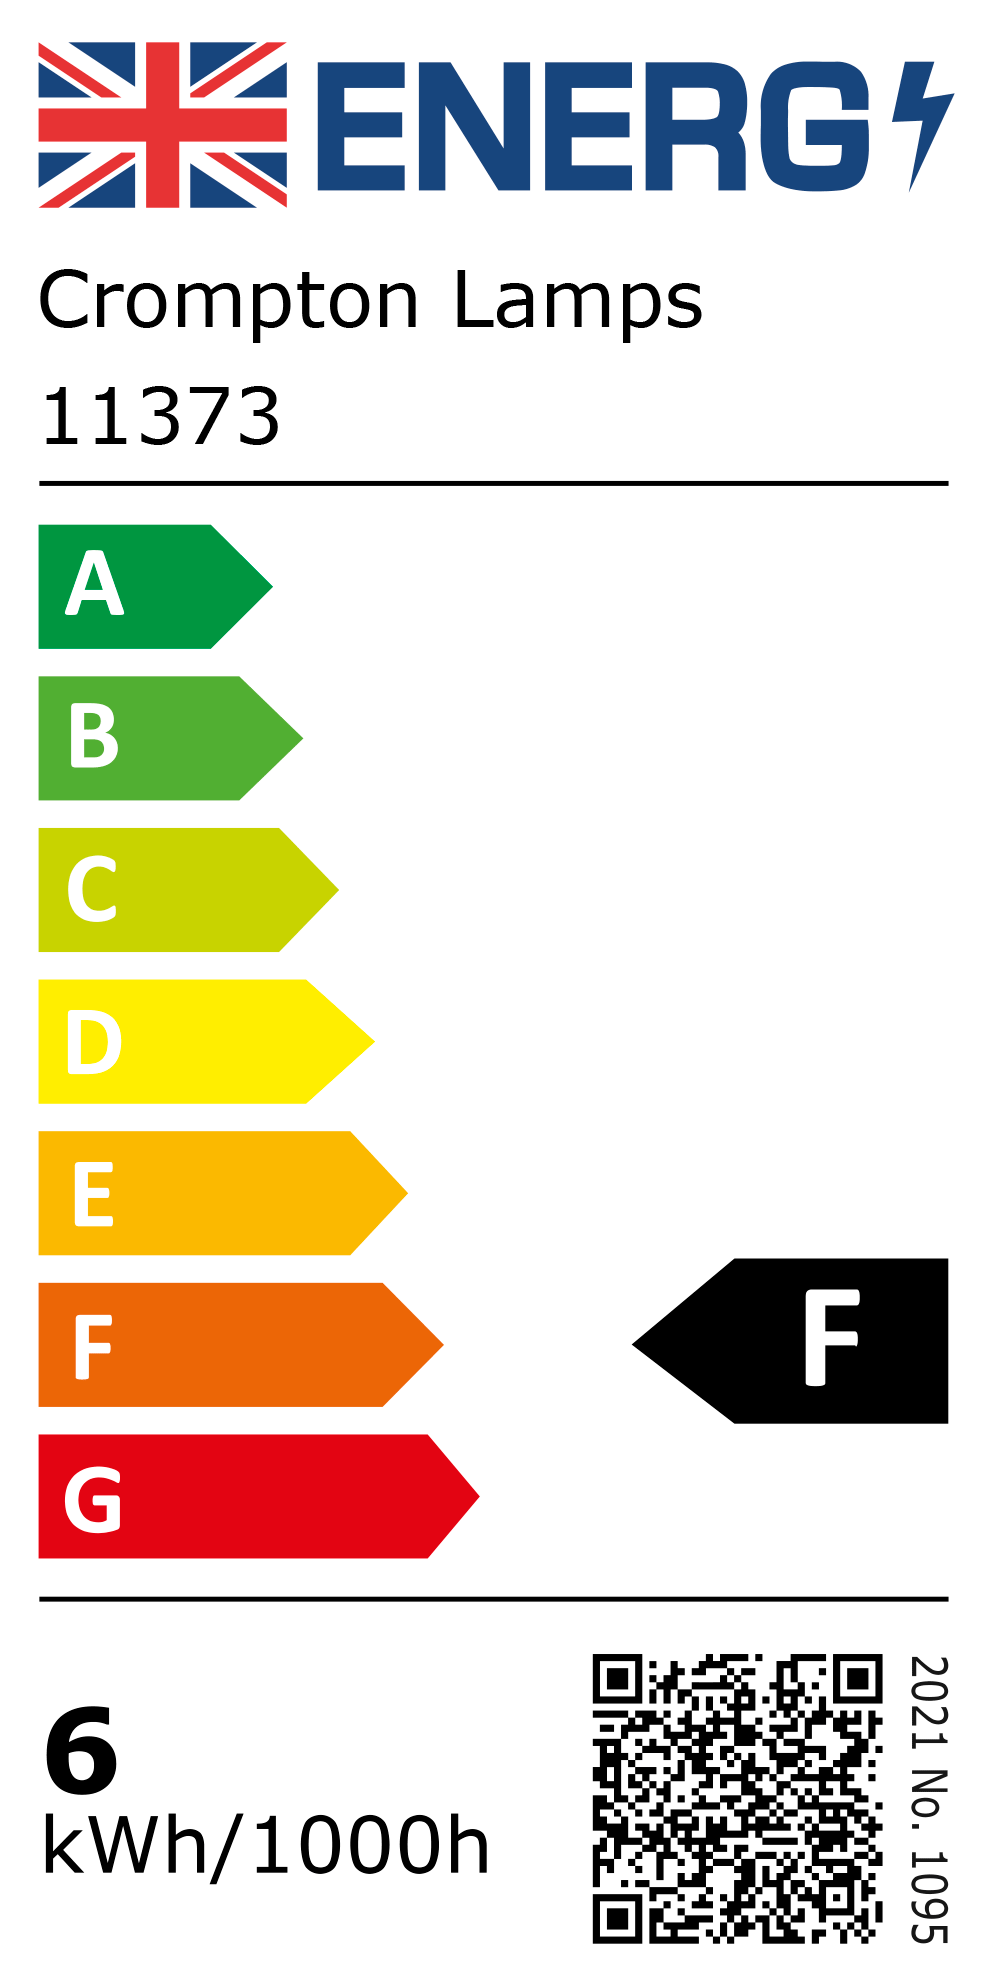 New 2021 Energy Rating Label: Stock Code 11373